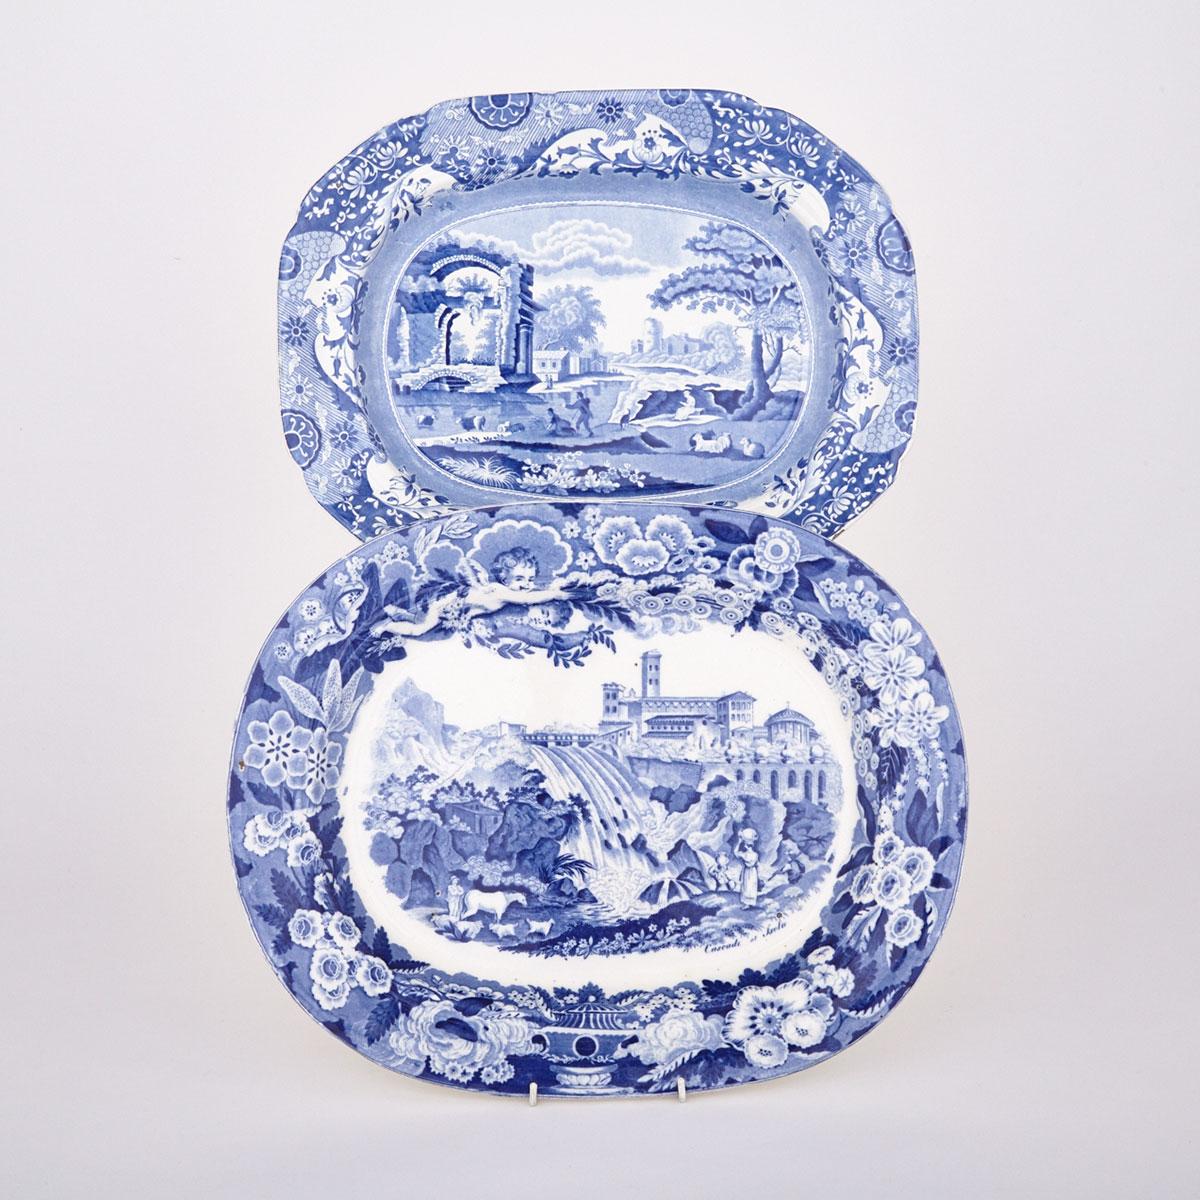 Two English Blue-Printed Oval Platters, 19th century